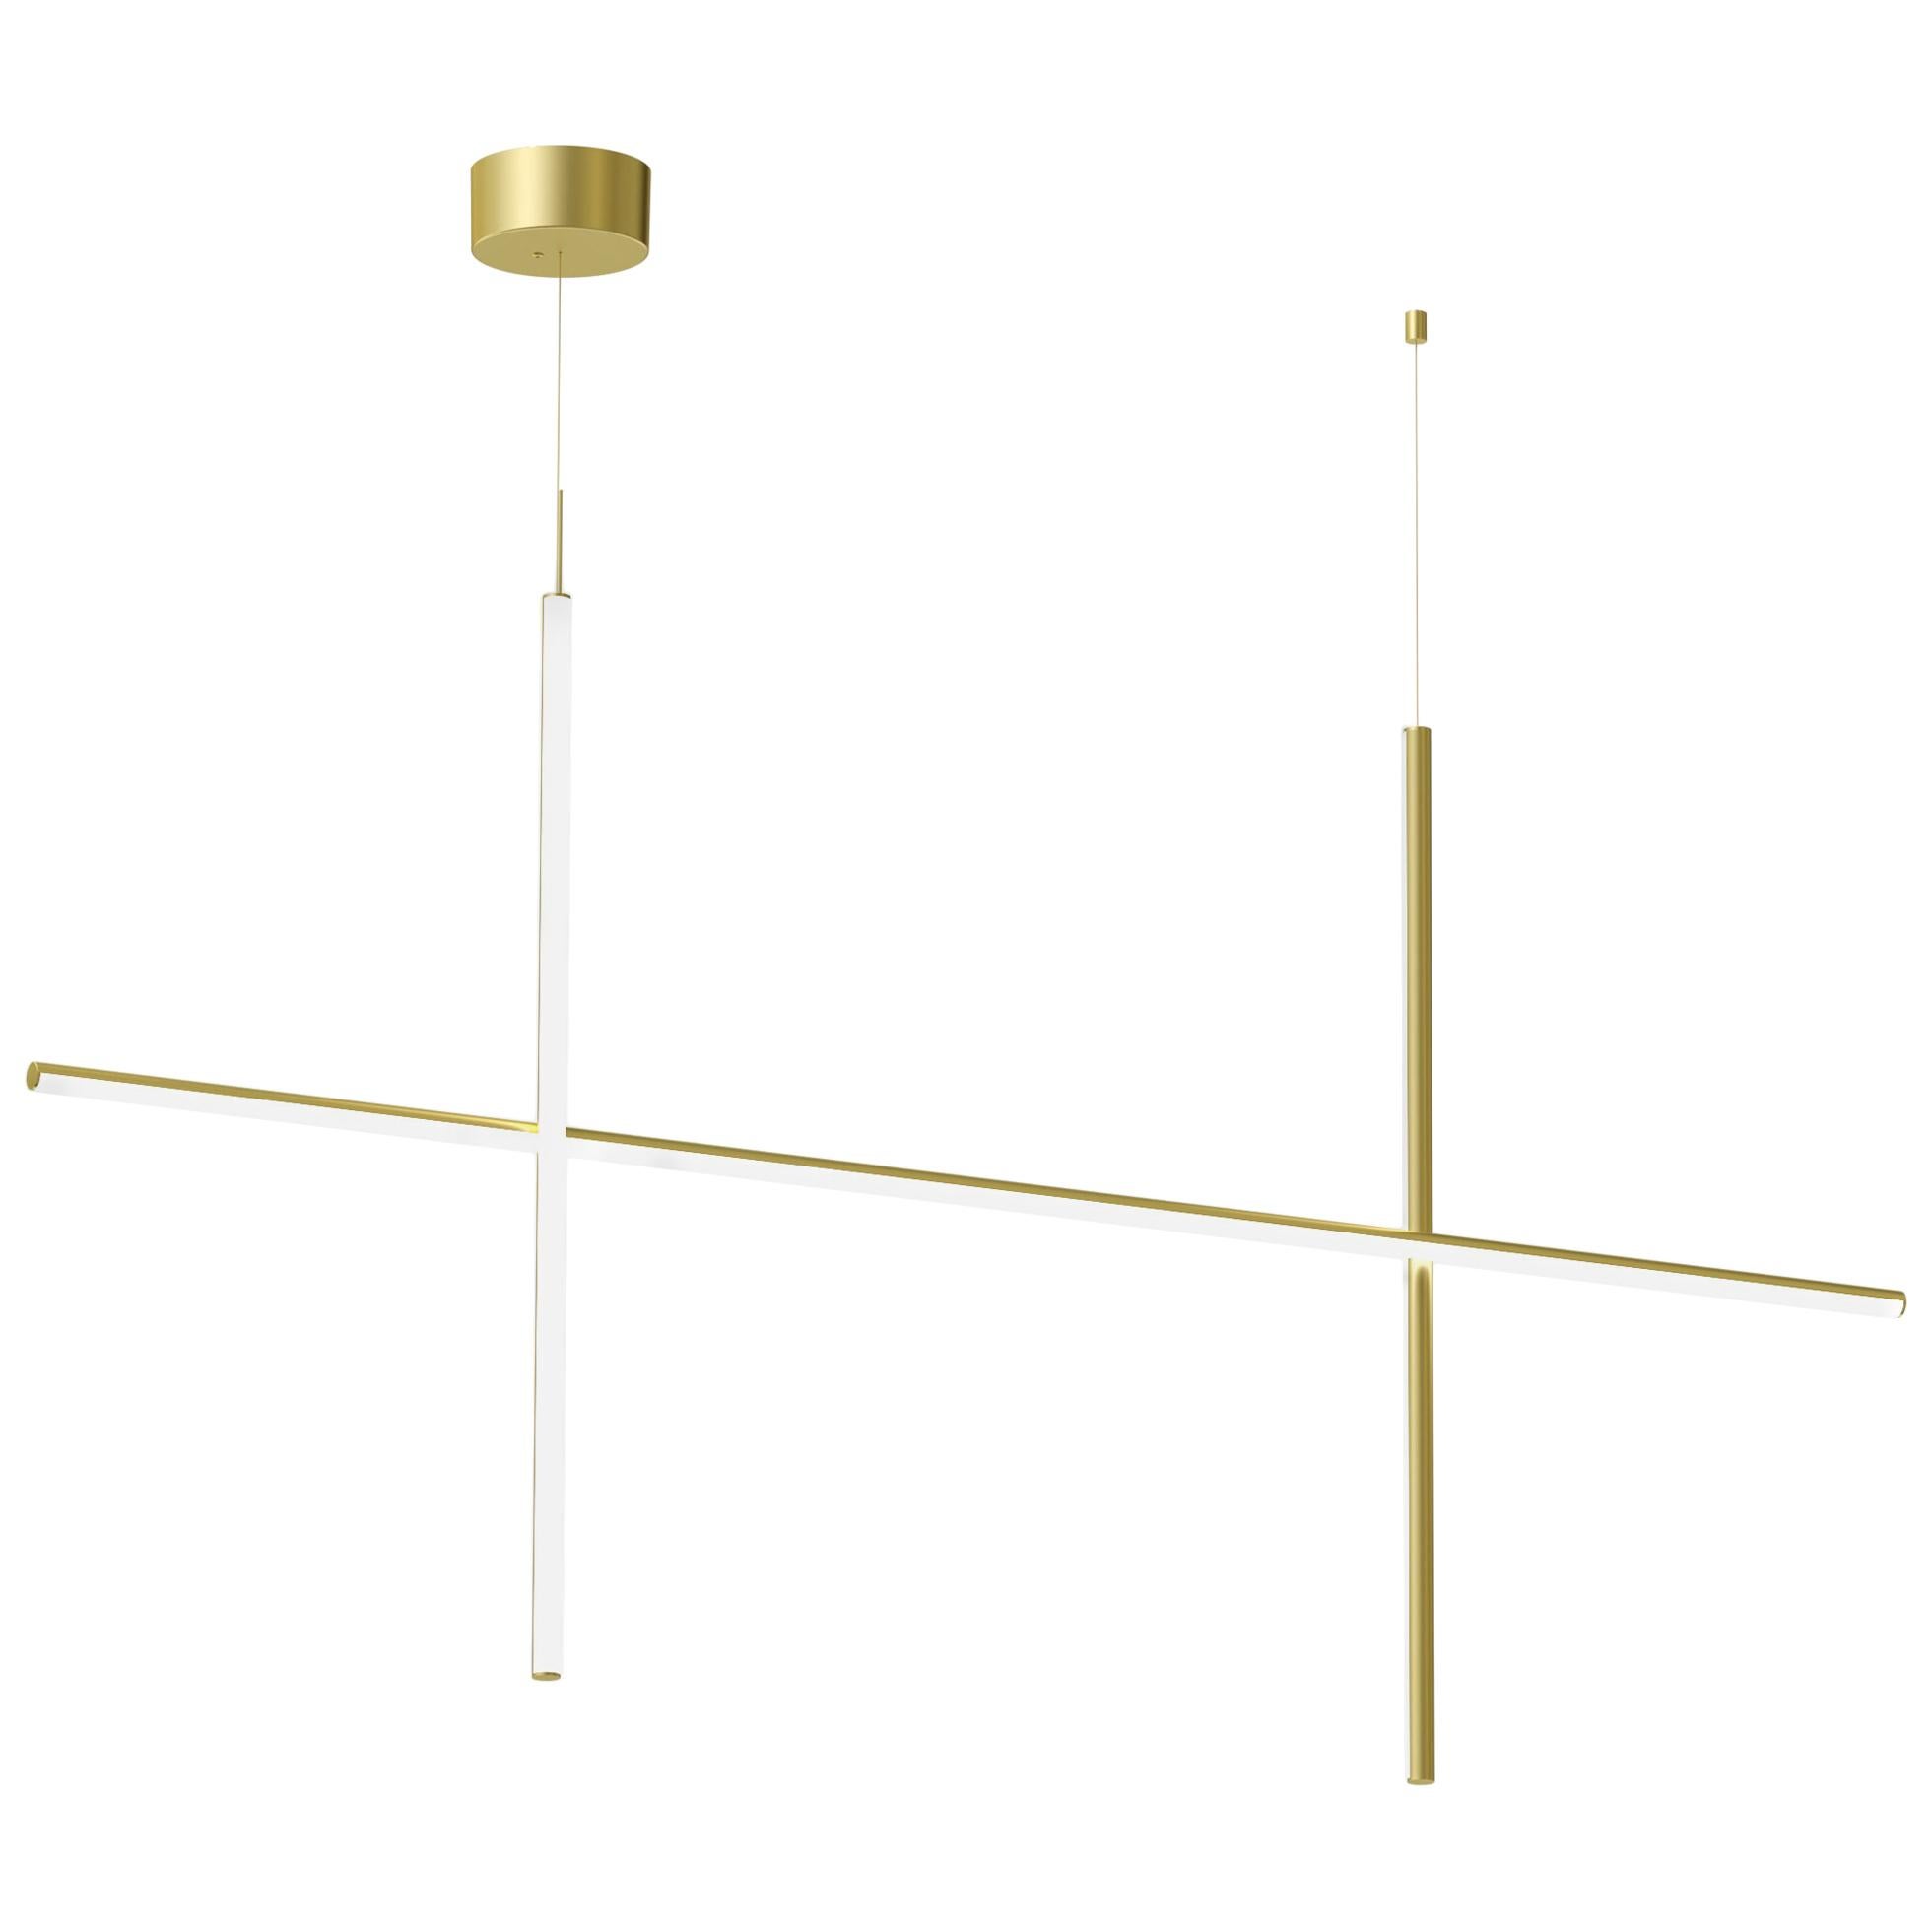 Flos Coordinates Suspension 2 Light in Champagne by Michael Anastassiades For Sale